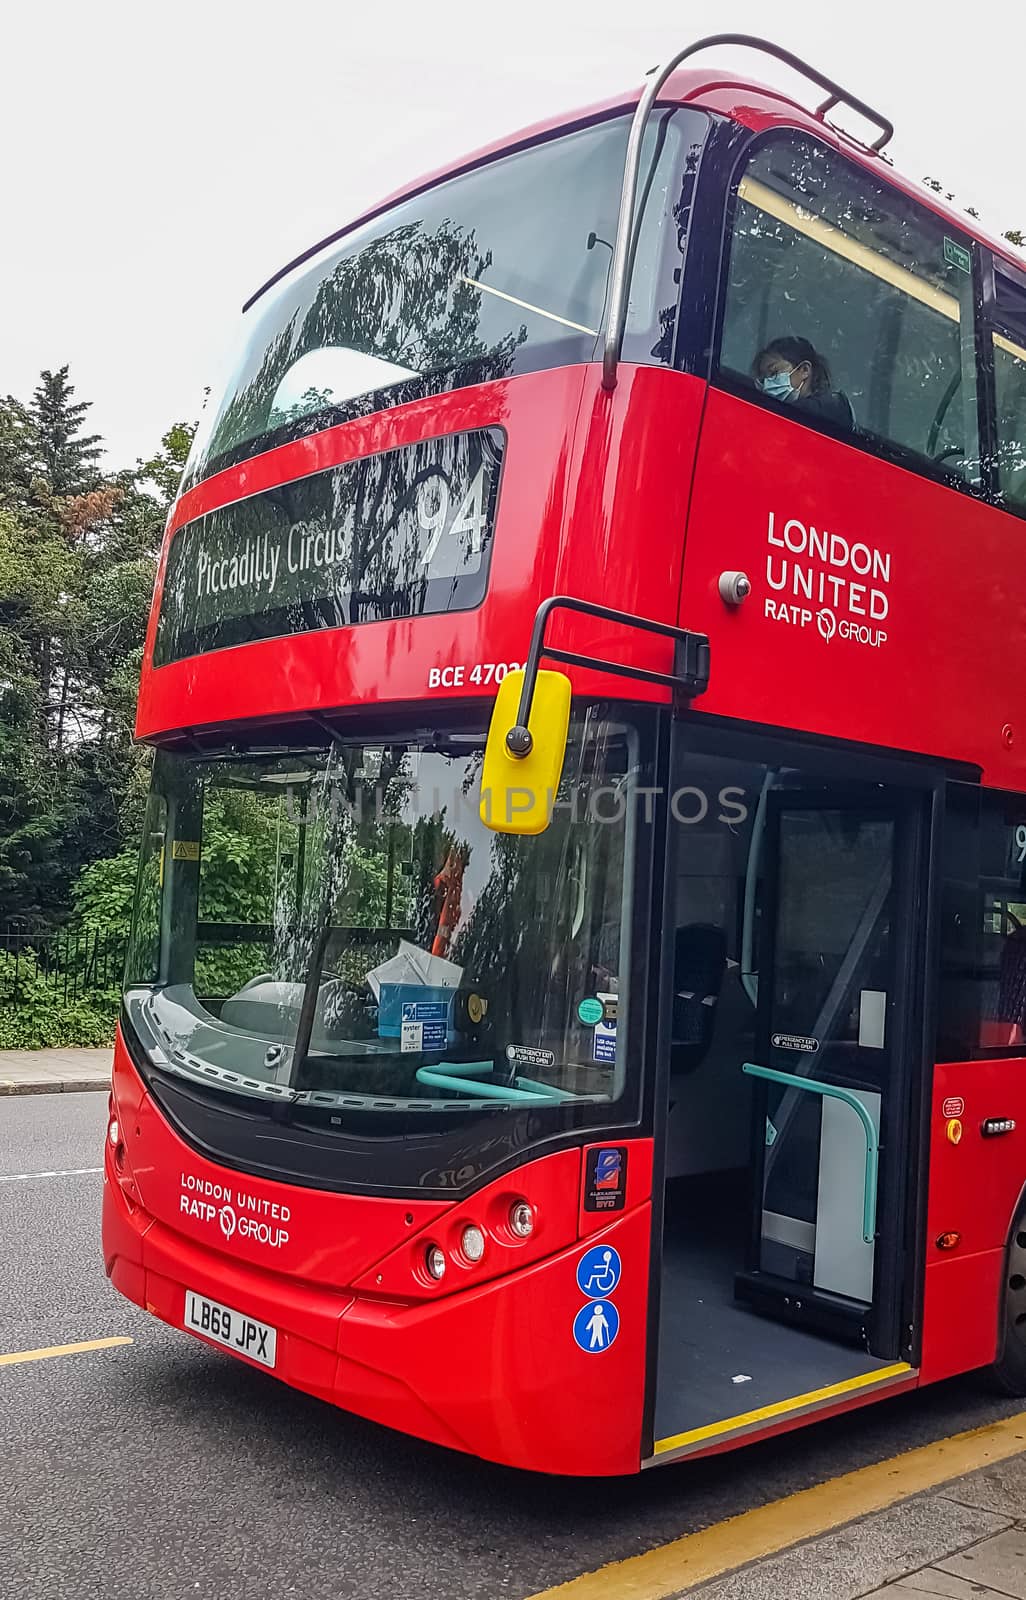 London, UK - July 8, 2020: Modern red double-decker bus is waiting for people in central London. It says on it - Piccadilly Circus 94. A person sitting on the second deck and wearing a mask.